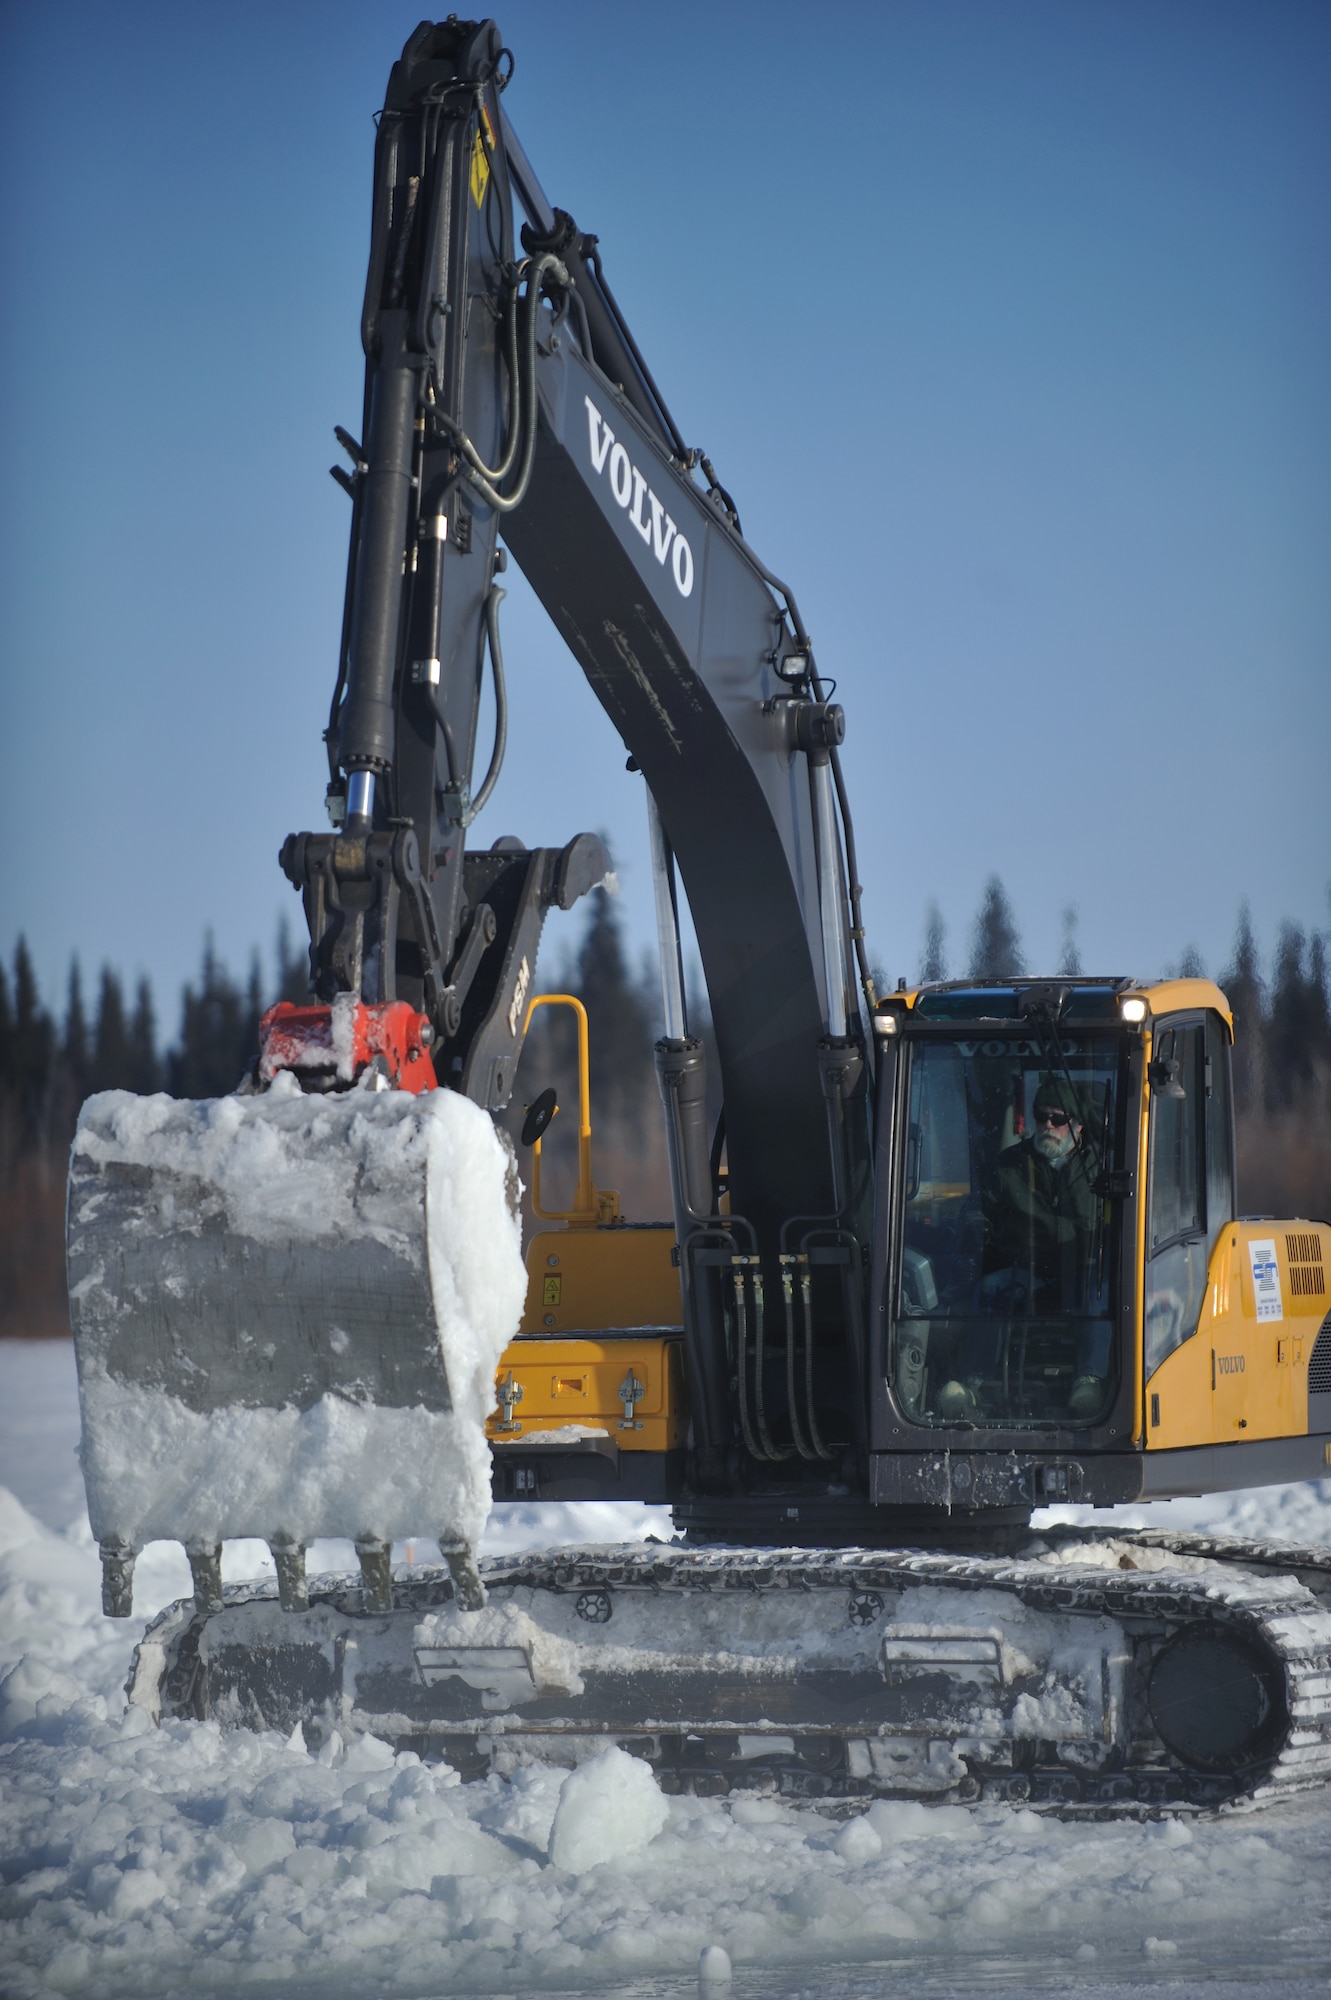 GALENA, Alaska-- Don Smith, a Marsh Creek LLC employee, unloads snow onto the Yukon River, March 19. Marsh Creek LLC, a contractor for the 611th Civil Engineer Squadron, is building an ice bridge to move supplies for demolition of the former Kalakaket Creek Radio Relay Station that is located 310 miles northwest of Anchorage. The station was built in 1957 and was used to transfer defense communications between White Alice Communication Systems up for demolition because of satellite technology in mid 1970s. (U.S. Air Force photo by Senior Airman Jonathan Steffen)